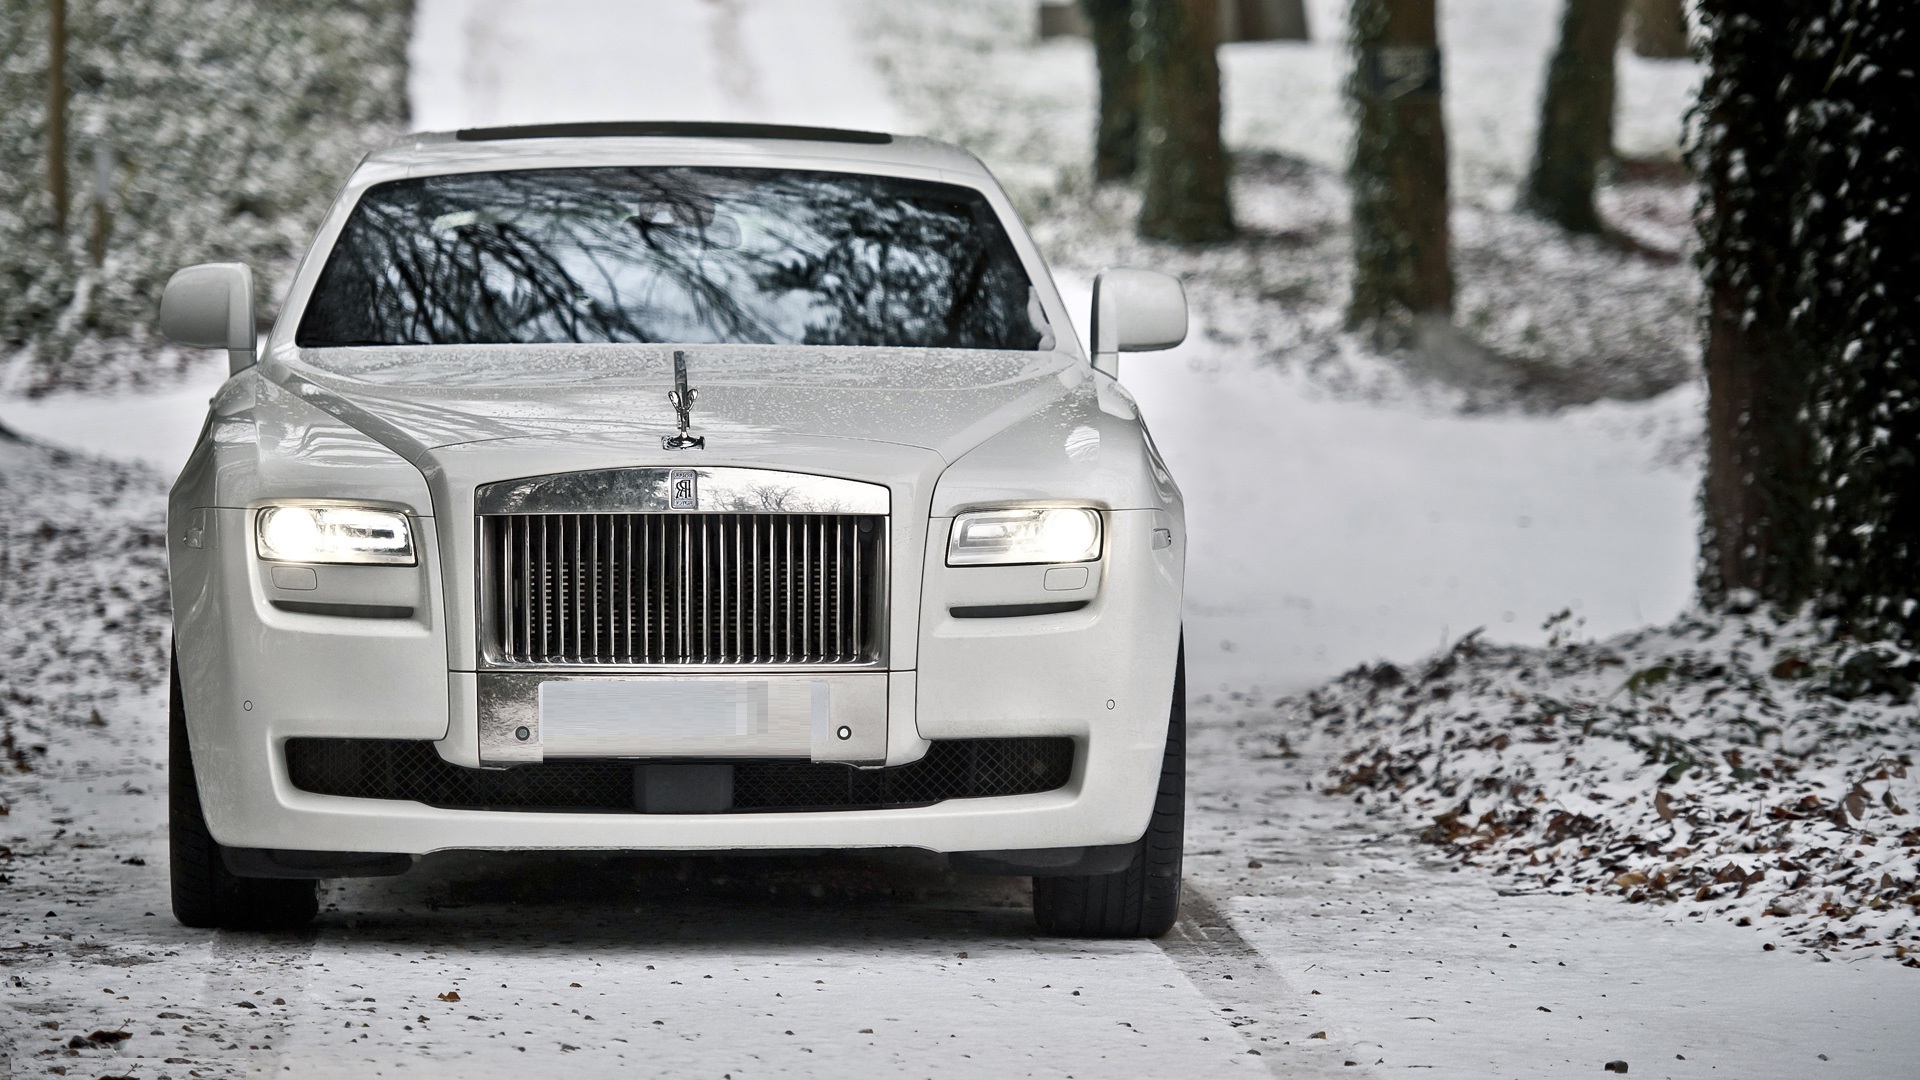 Classic Rolls Royce Wallpapers Hd With High Resolution - White Rolls Royce  Hd Wallpapers 1080p - 1920x1080 Wallpaper 